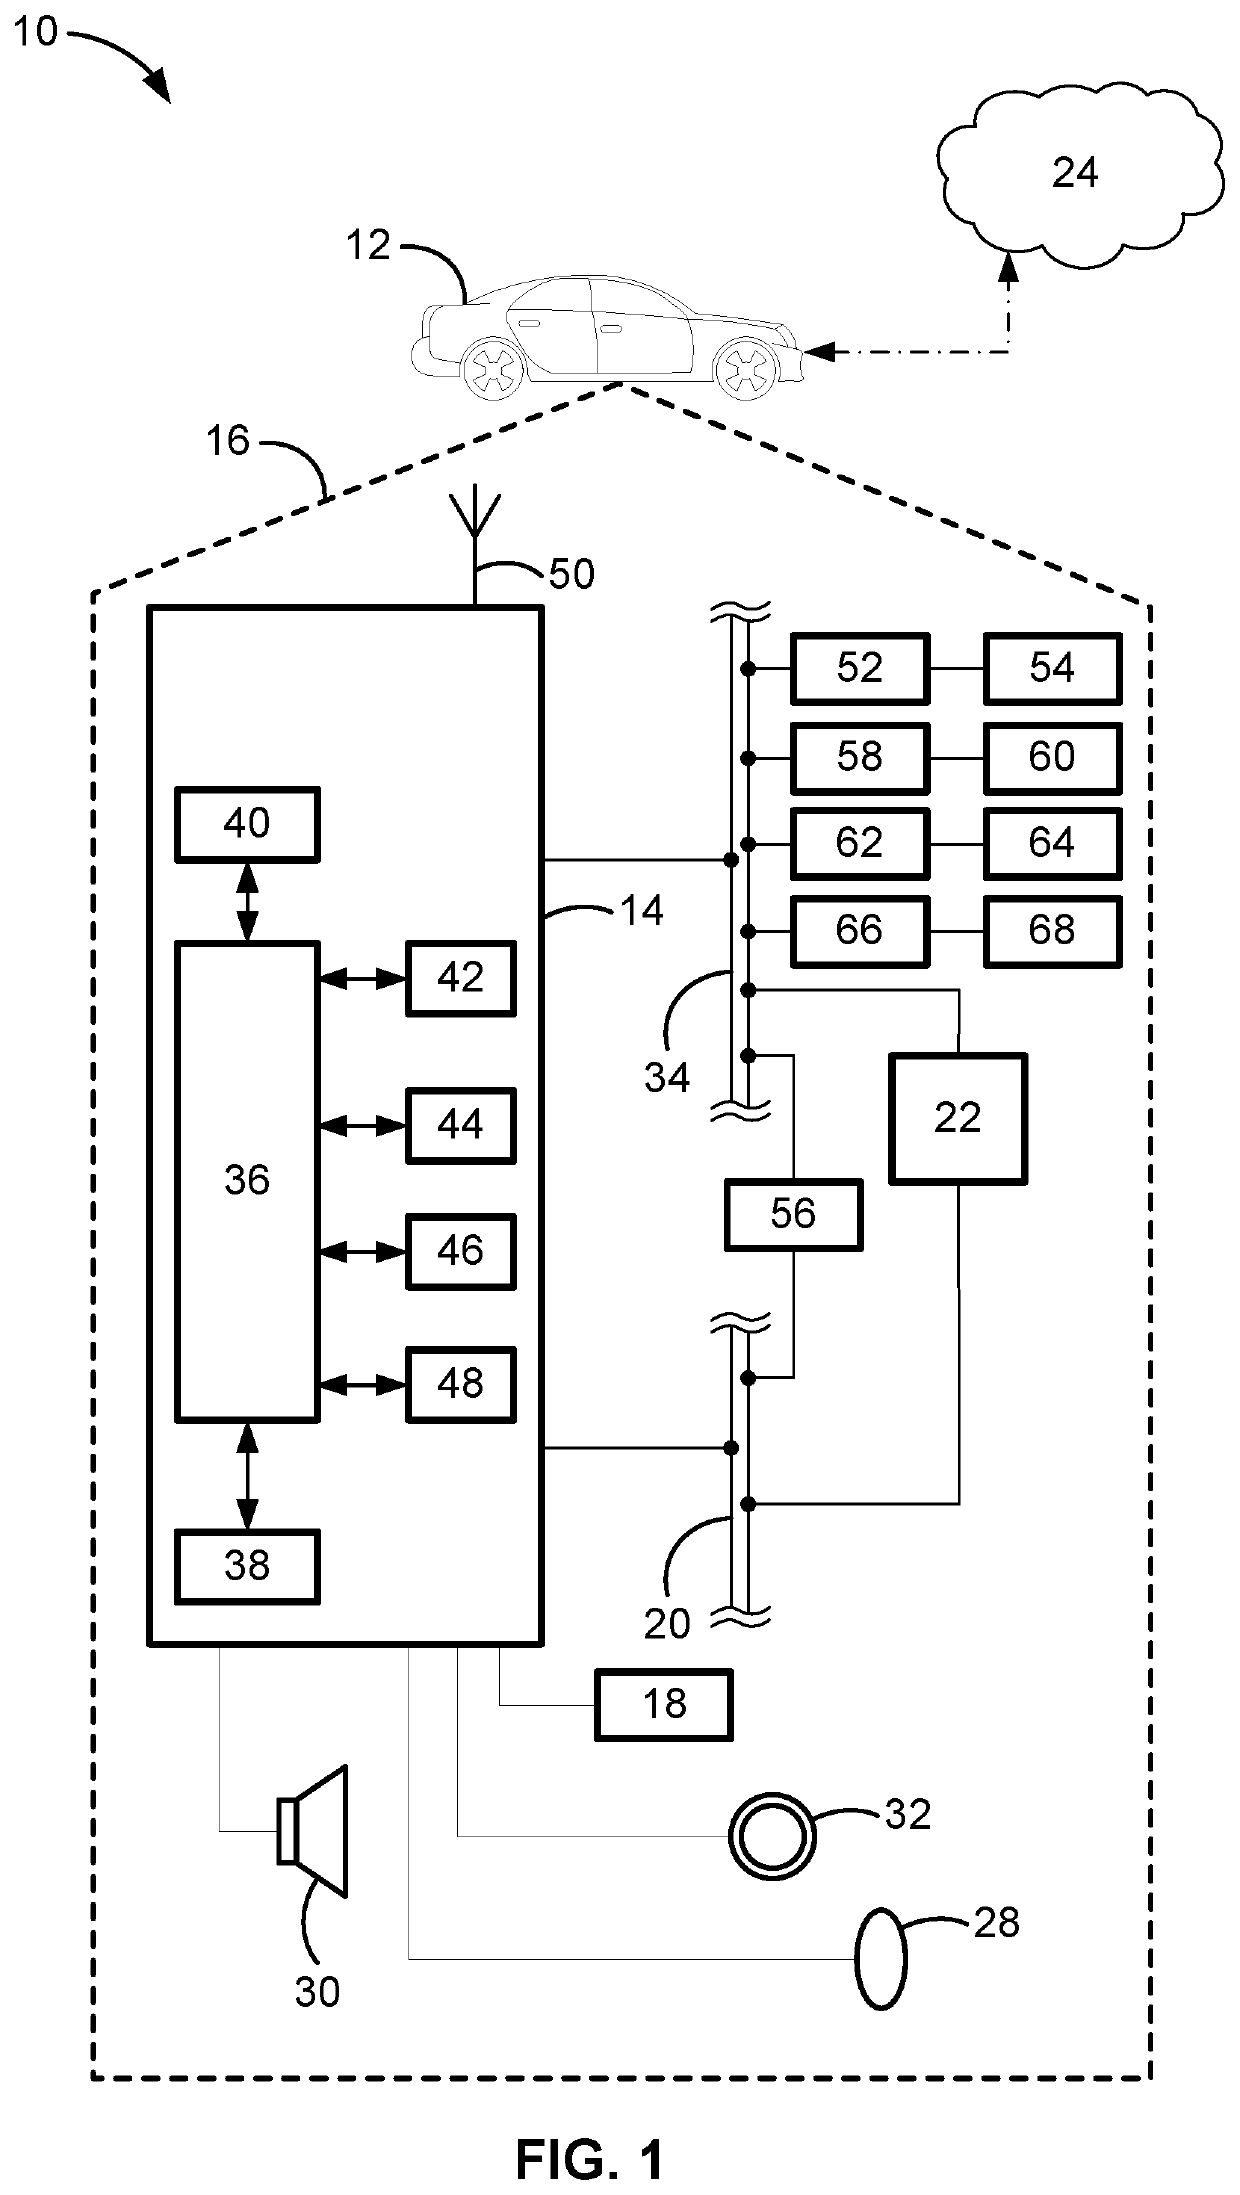 Automated driving systems and control logic using sensor fusion for intelligent vehicle control